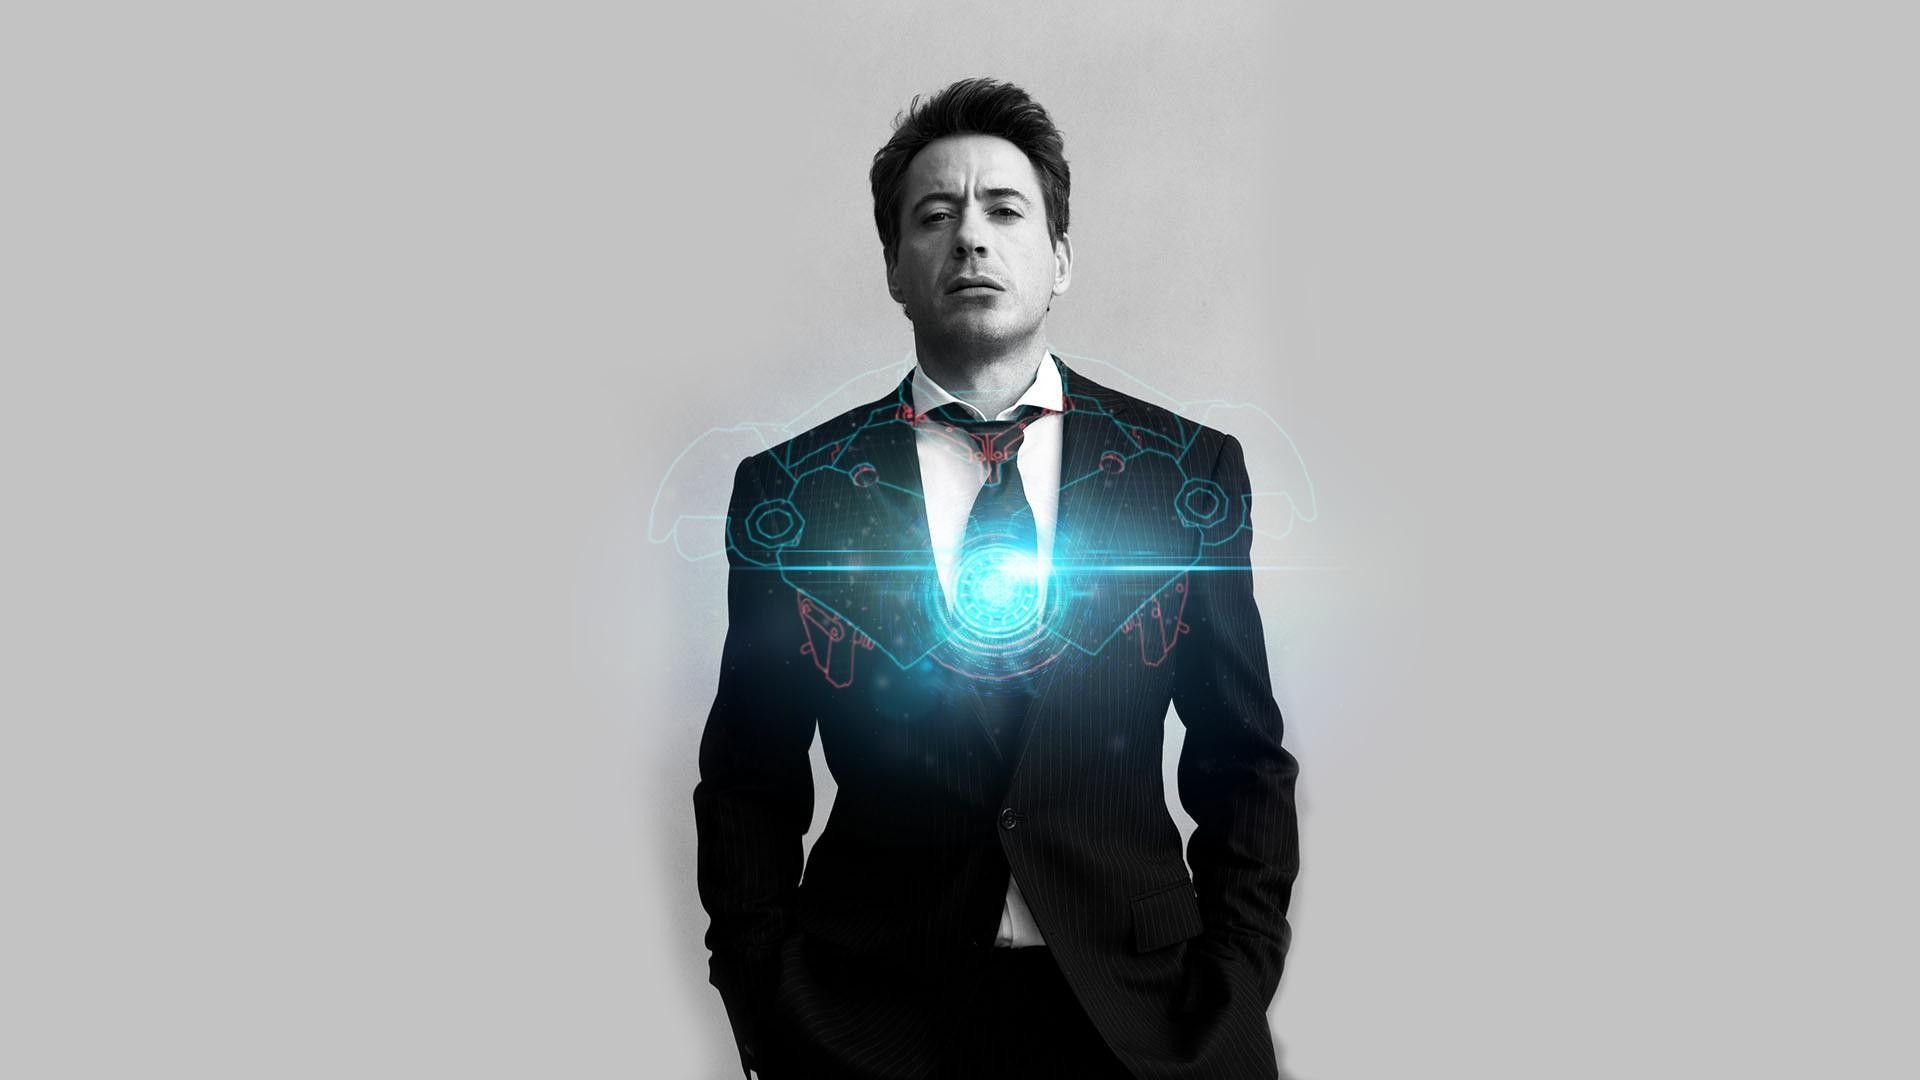 Robert Downey Jr Wallpapers High Resolution and Quality Download